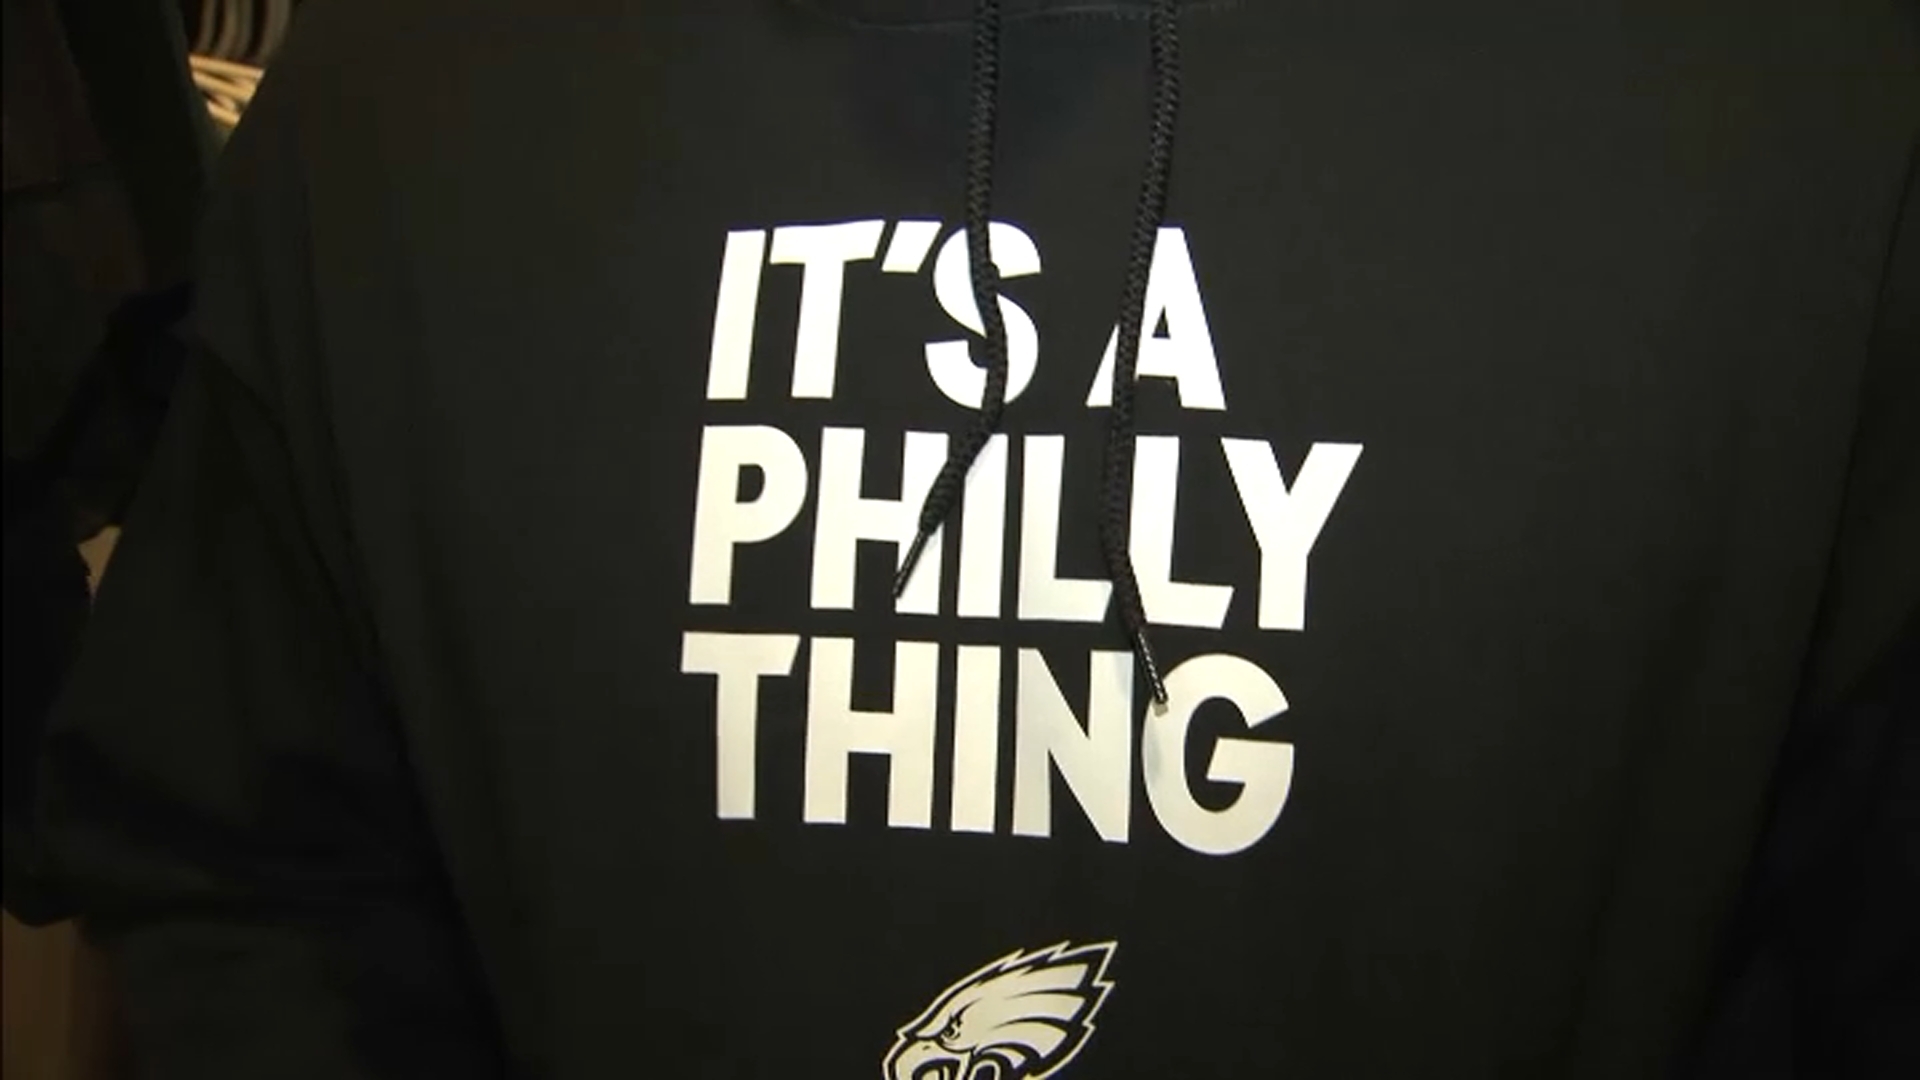 Philadelphia Eagles Players Names Skyline It's A Philly Thing